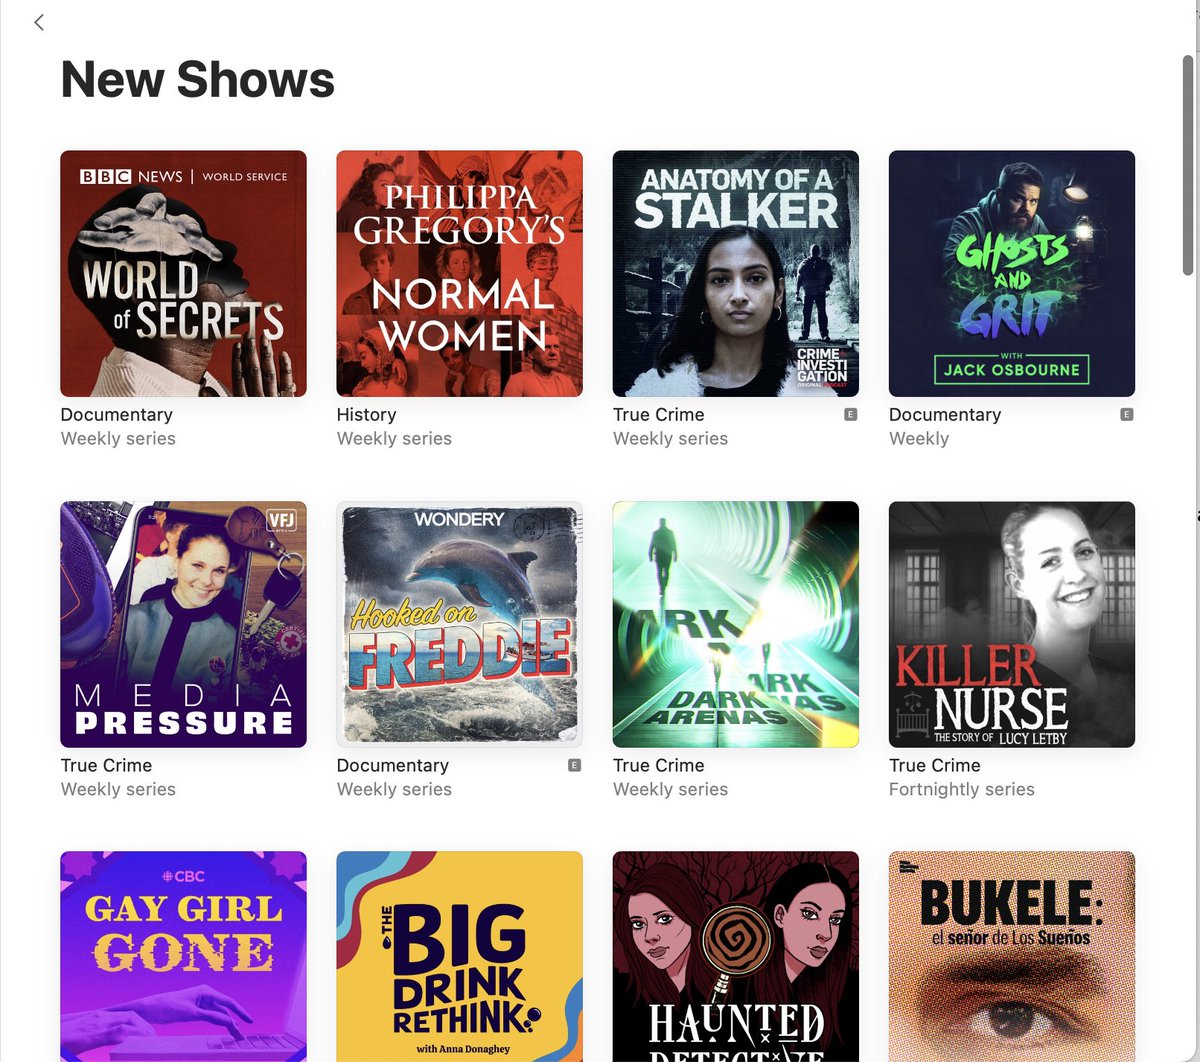 We are featured in Documentary New Shows on @ApplePodcasts today. Rubbing shoulders with fantastic shows like World of Secrets, its a testament to the hard work of @RuchoSharma, @GrWoodcock & the @cuepodcasts team, and @CI 💪